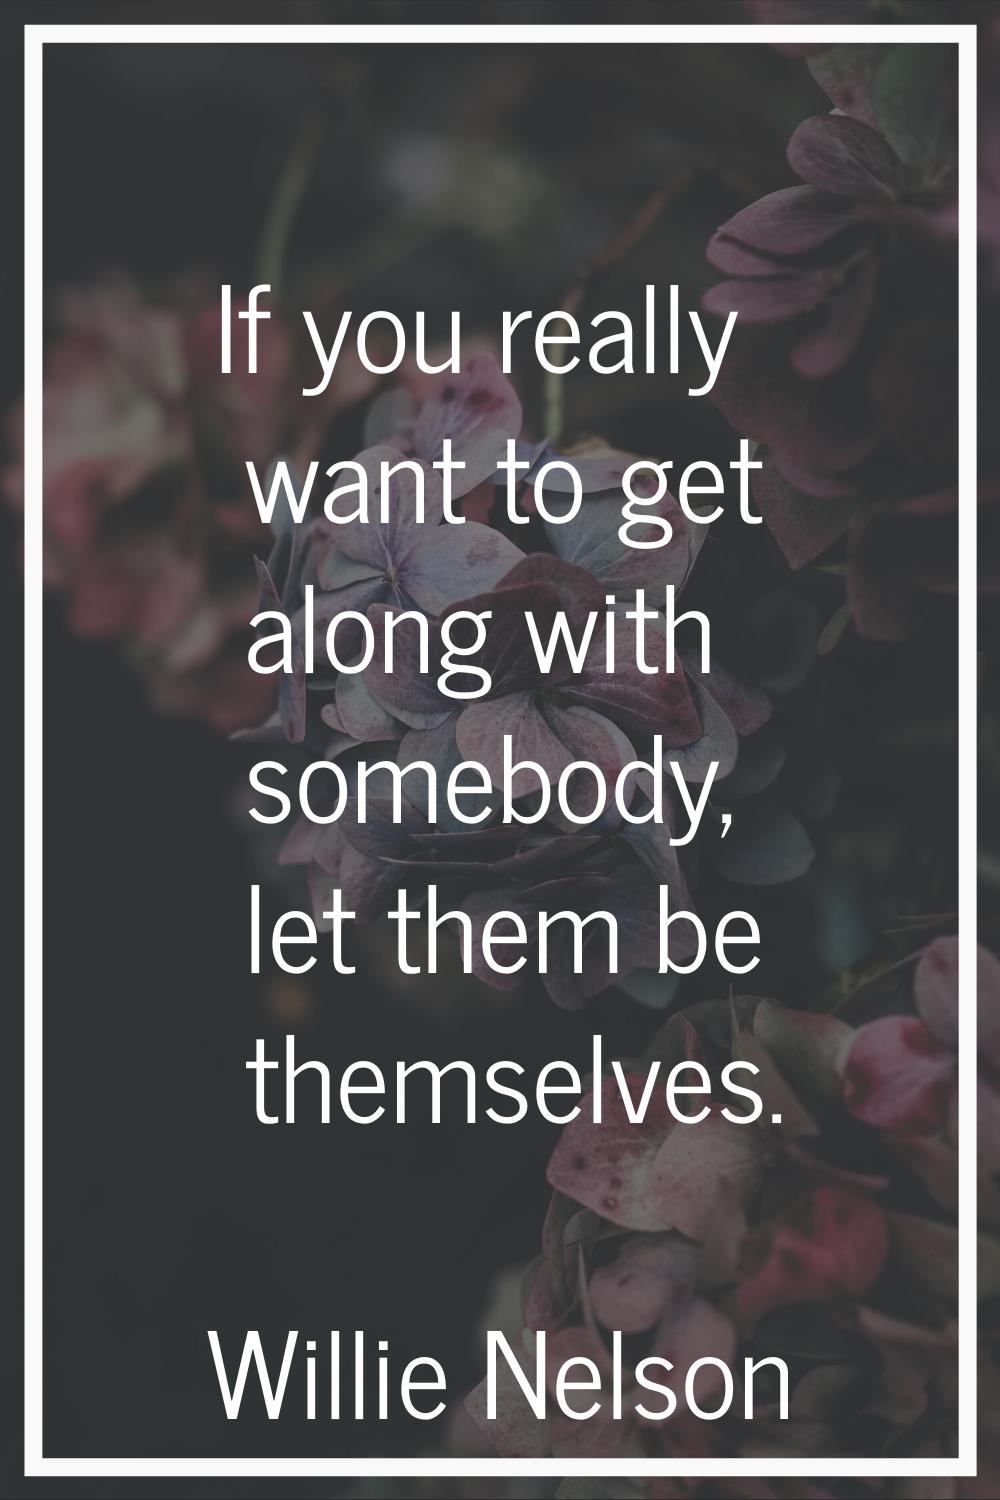 If you really want to get along with somebody, let them be themselves.